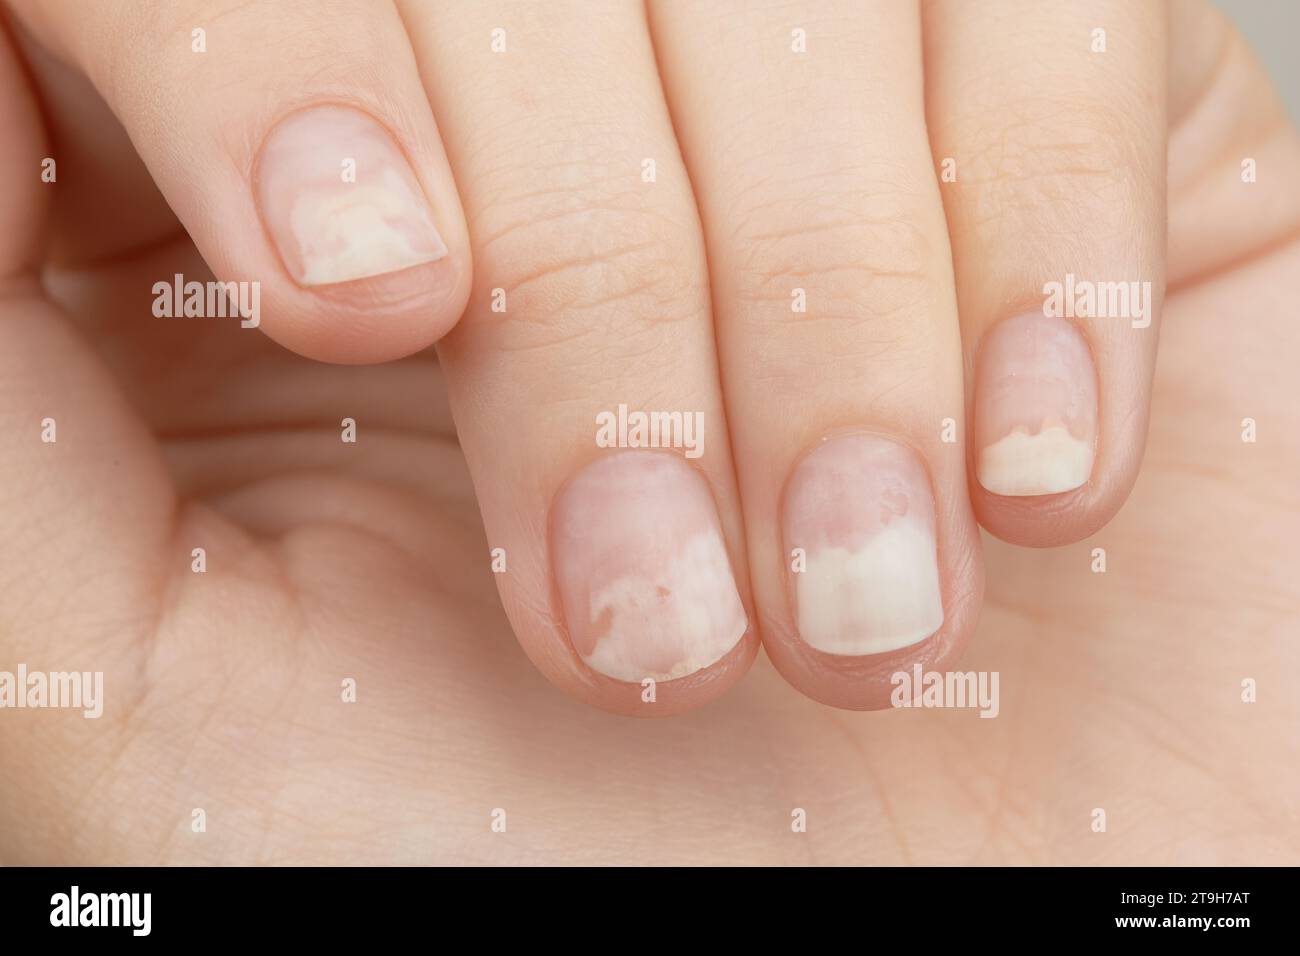 Fingernails with onycholysis after removing gel polish. Womans hands with damaged nails Stock Photo